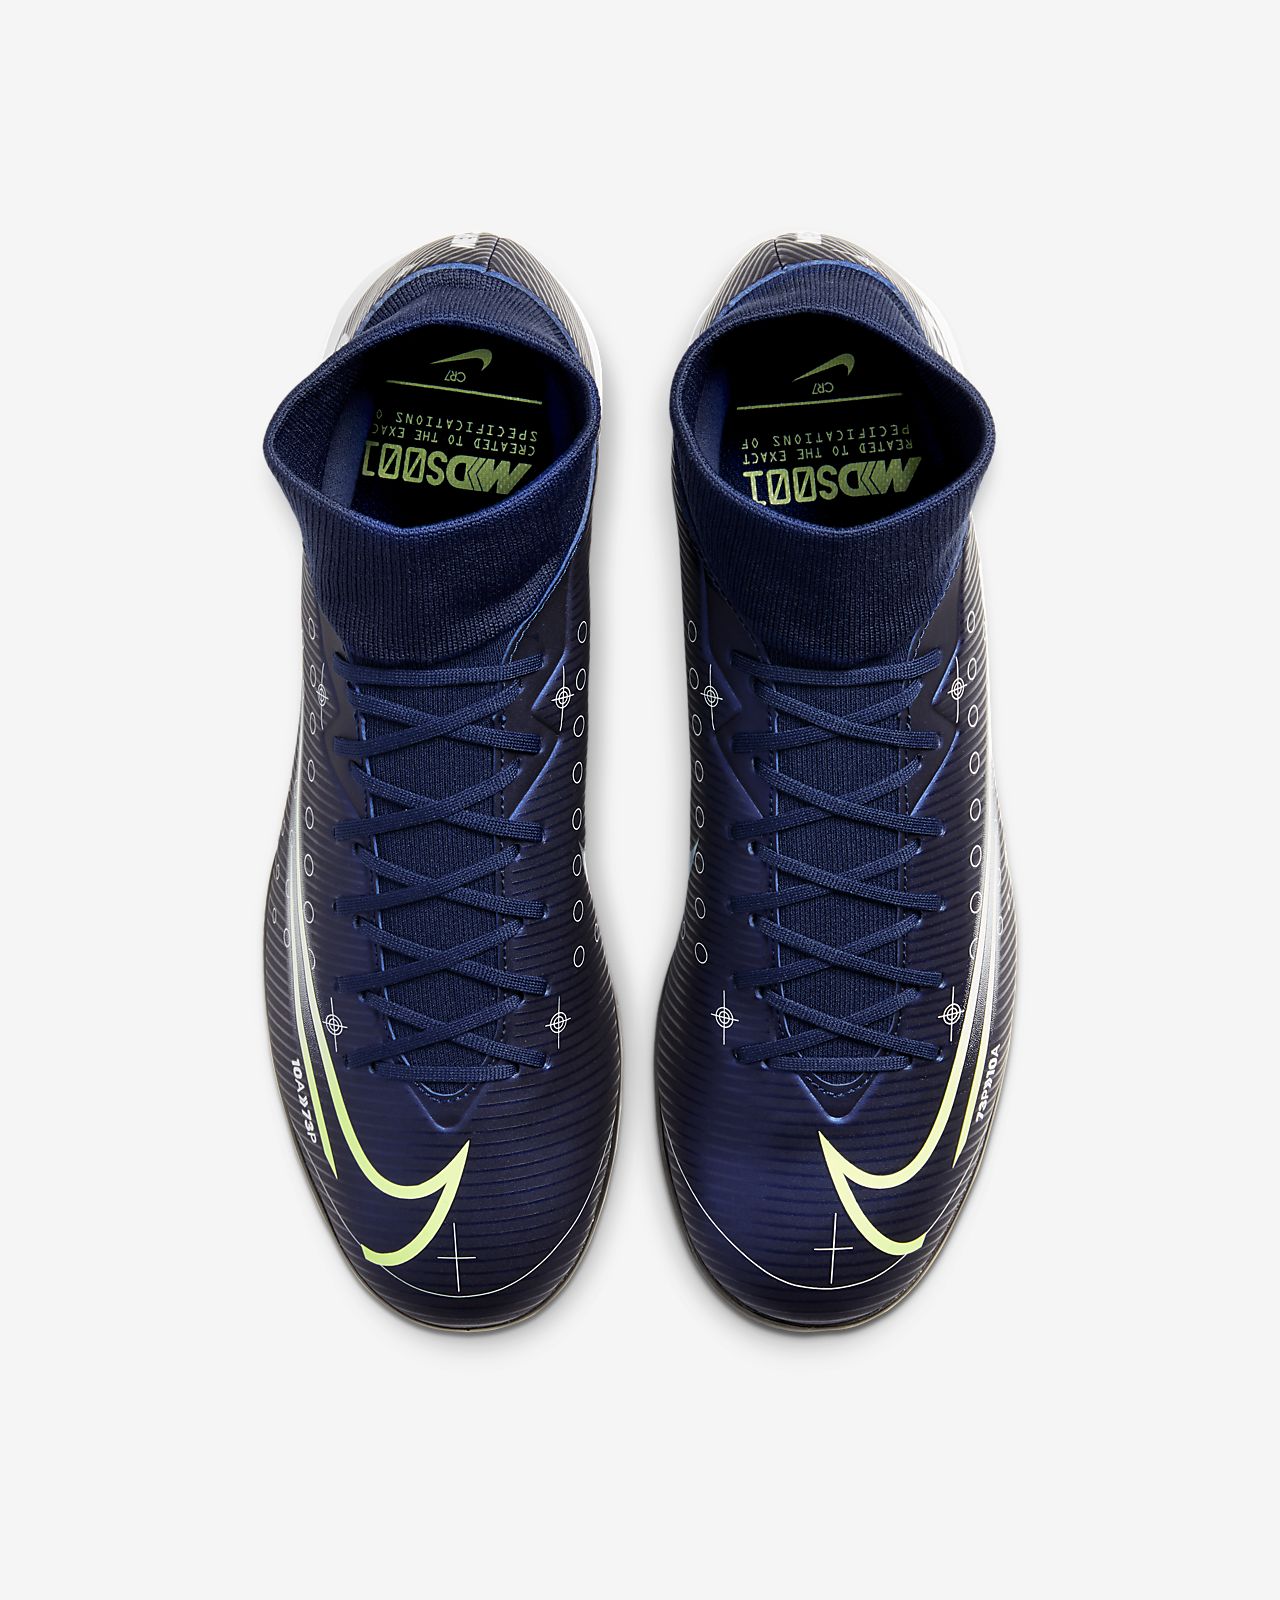 Shoes Nike JR Superfly6 Academy GS IC Blue price 62.00.